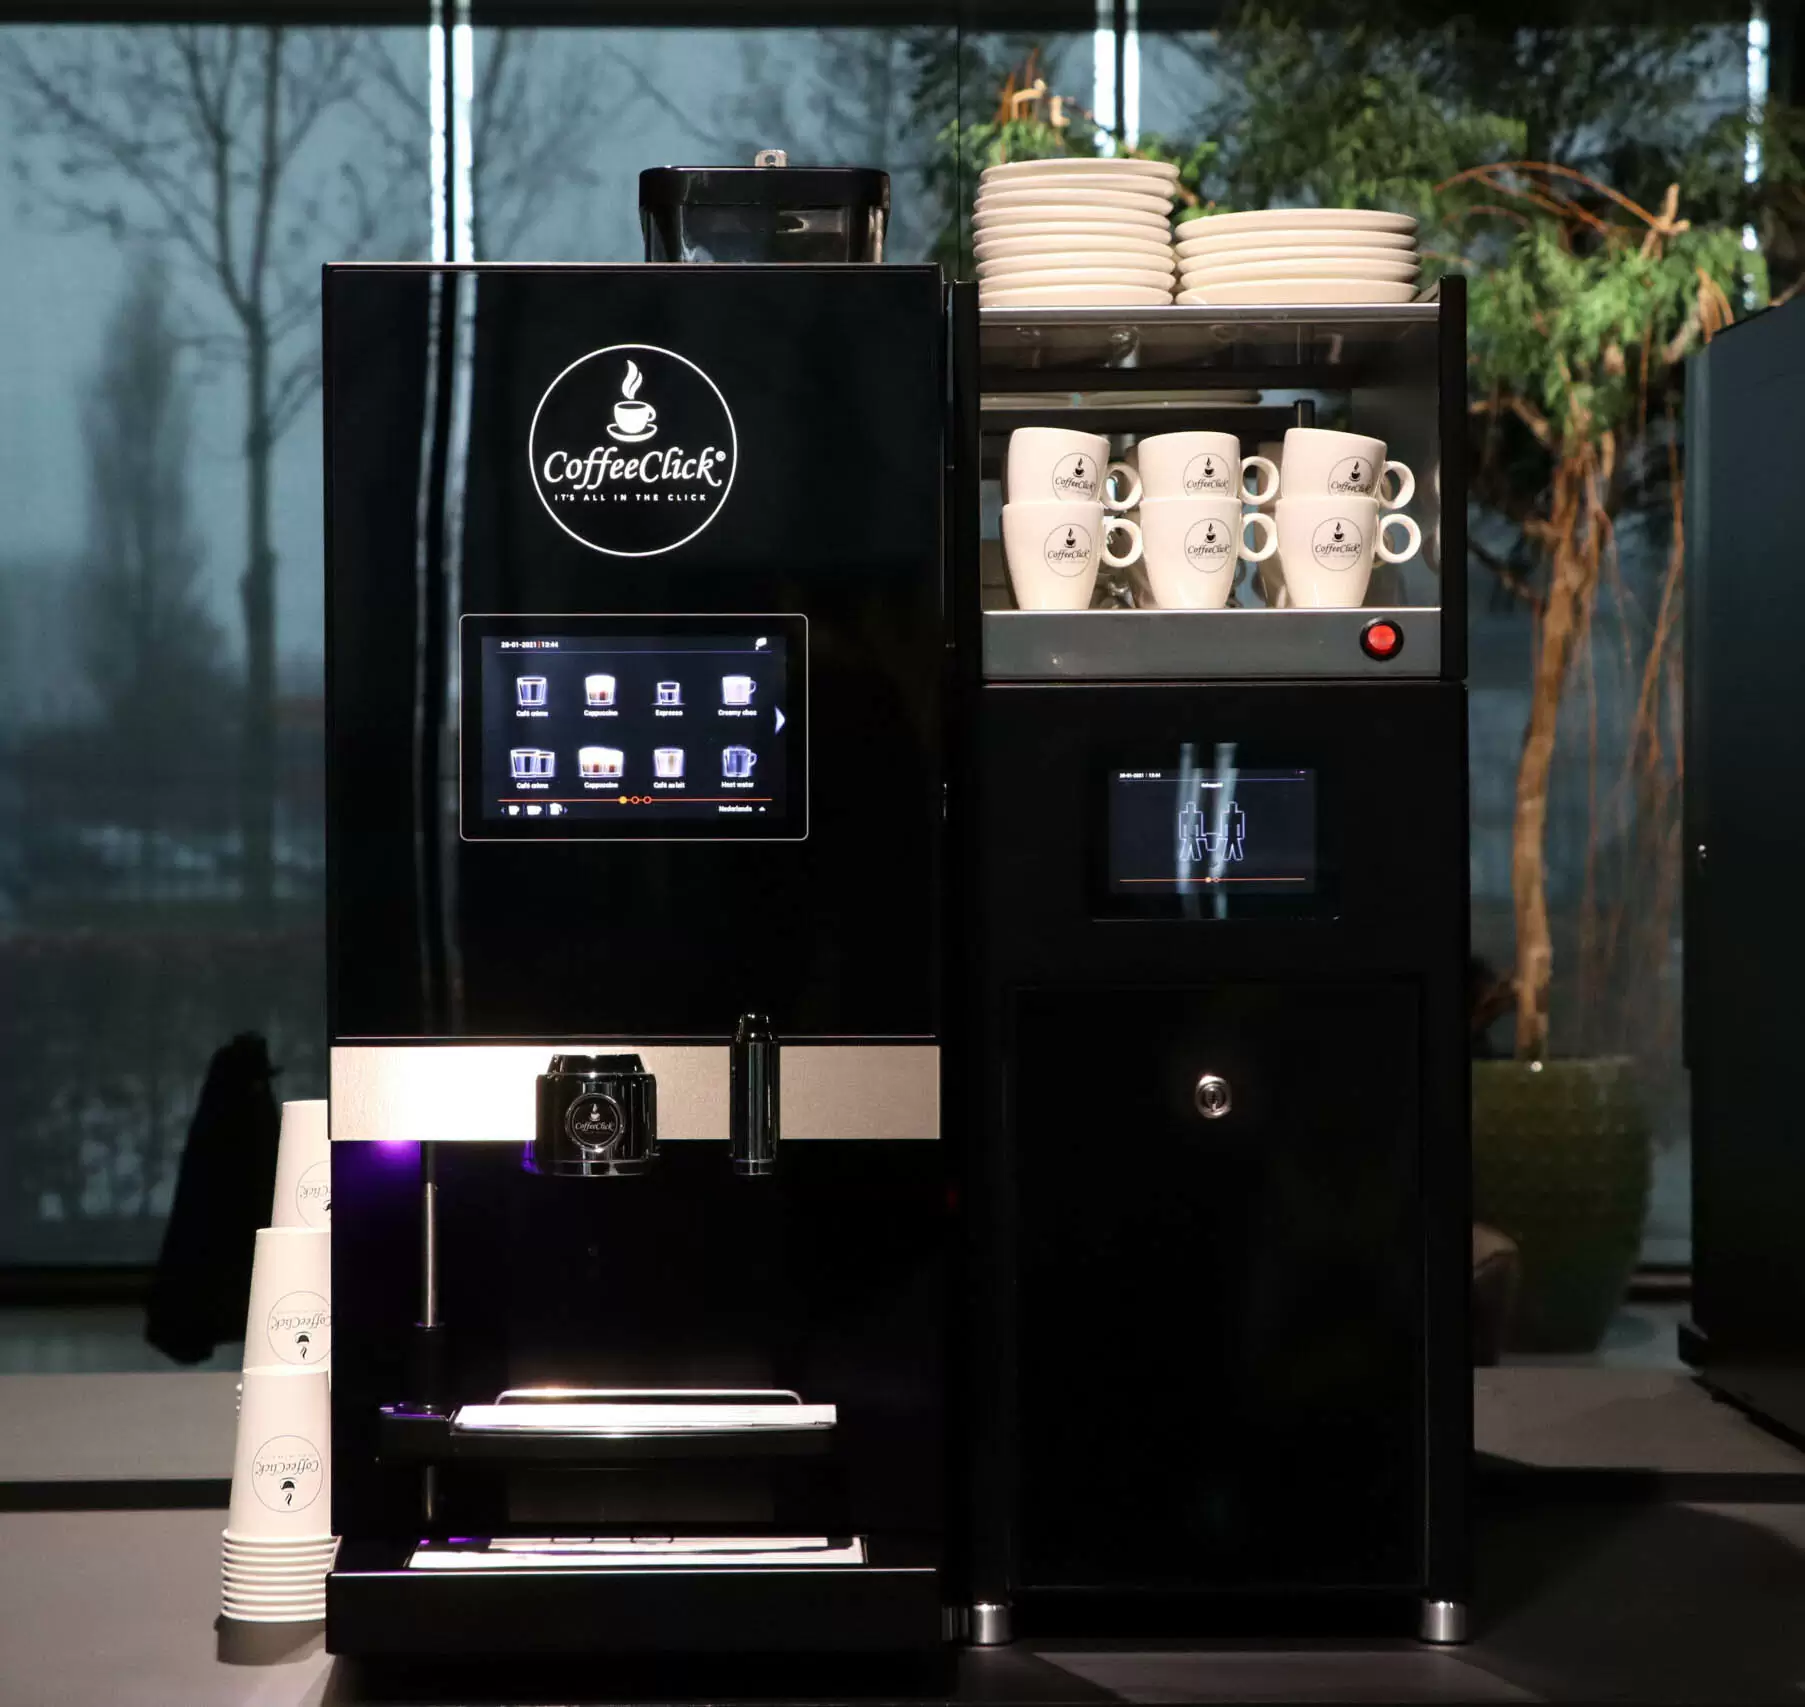 Coffee machine installed at a company